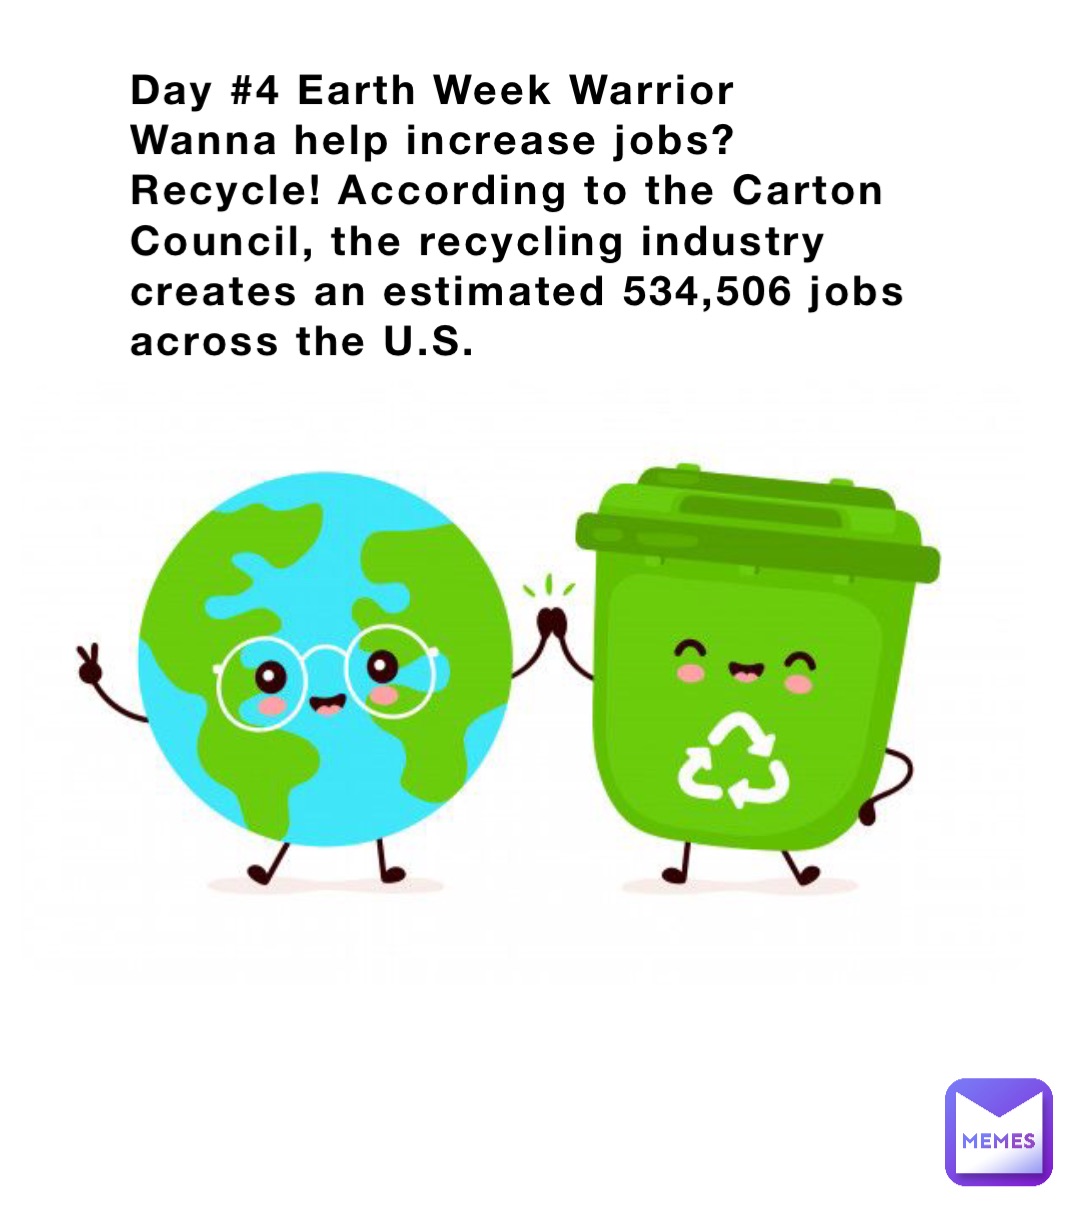 Day #4 Earth Week Warrior 
Wanna help increase jobs? Recycle! According to the Carton Council, the recycling industry creates an estimated 534,506 jobs across the U.S.